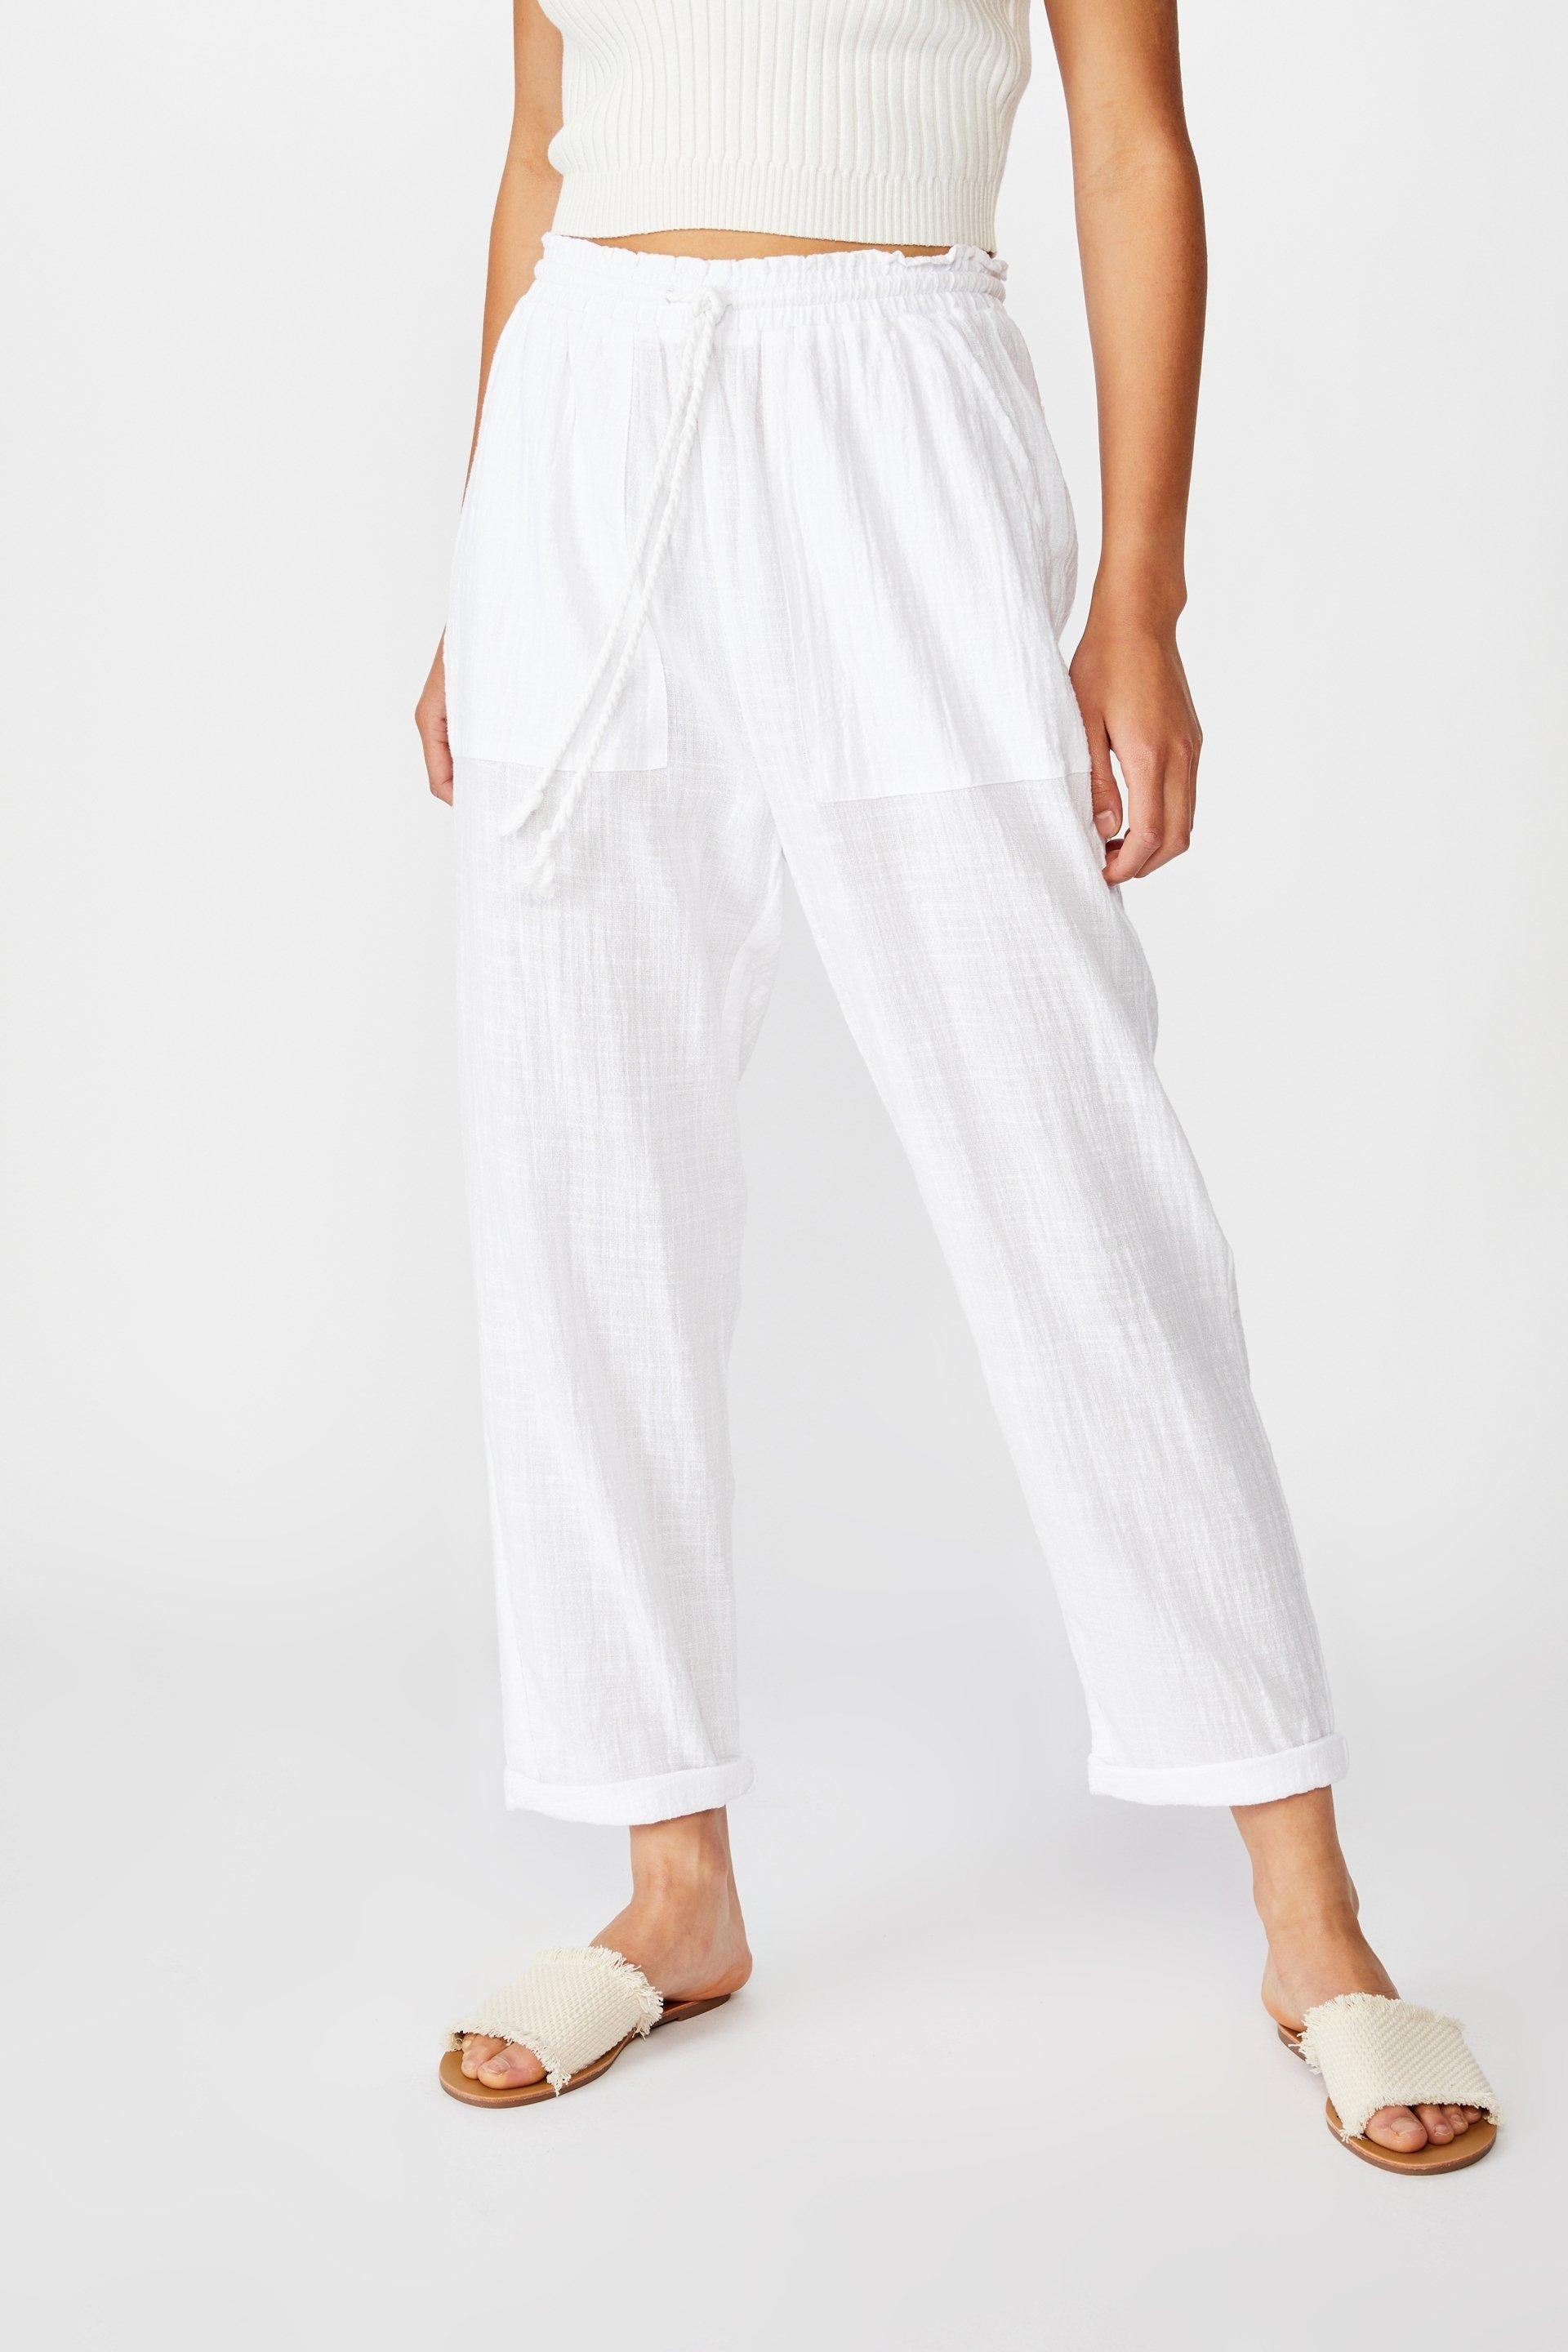 Weekend pant - white Cotton On Trousers | Superbalist.com